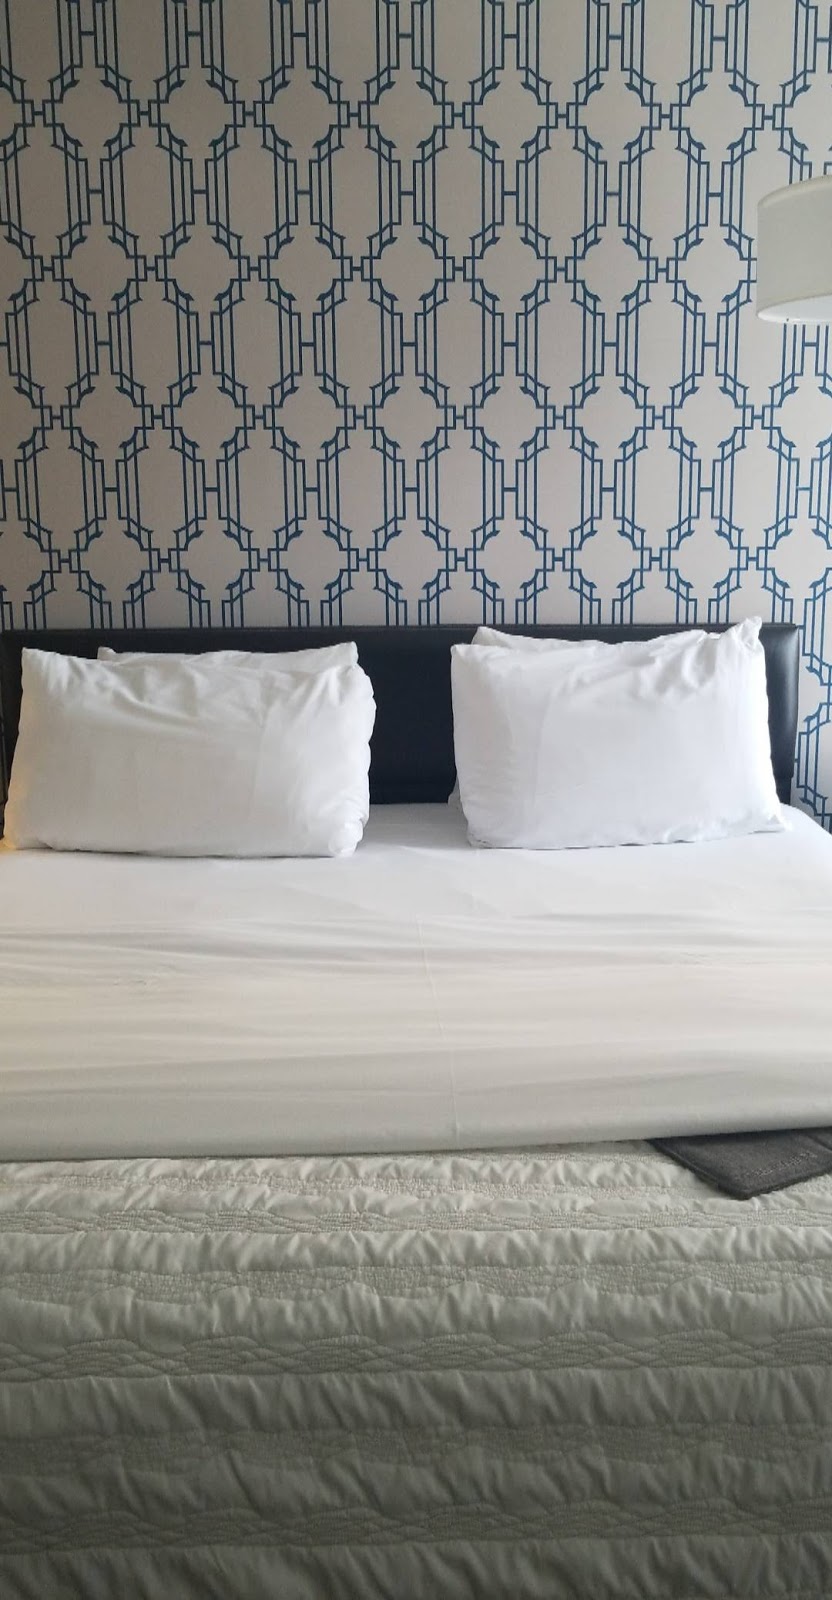 Guest room with hexagon-patterned wall paper and a plush king bed